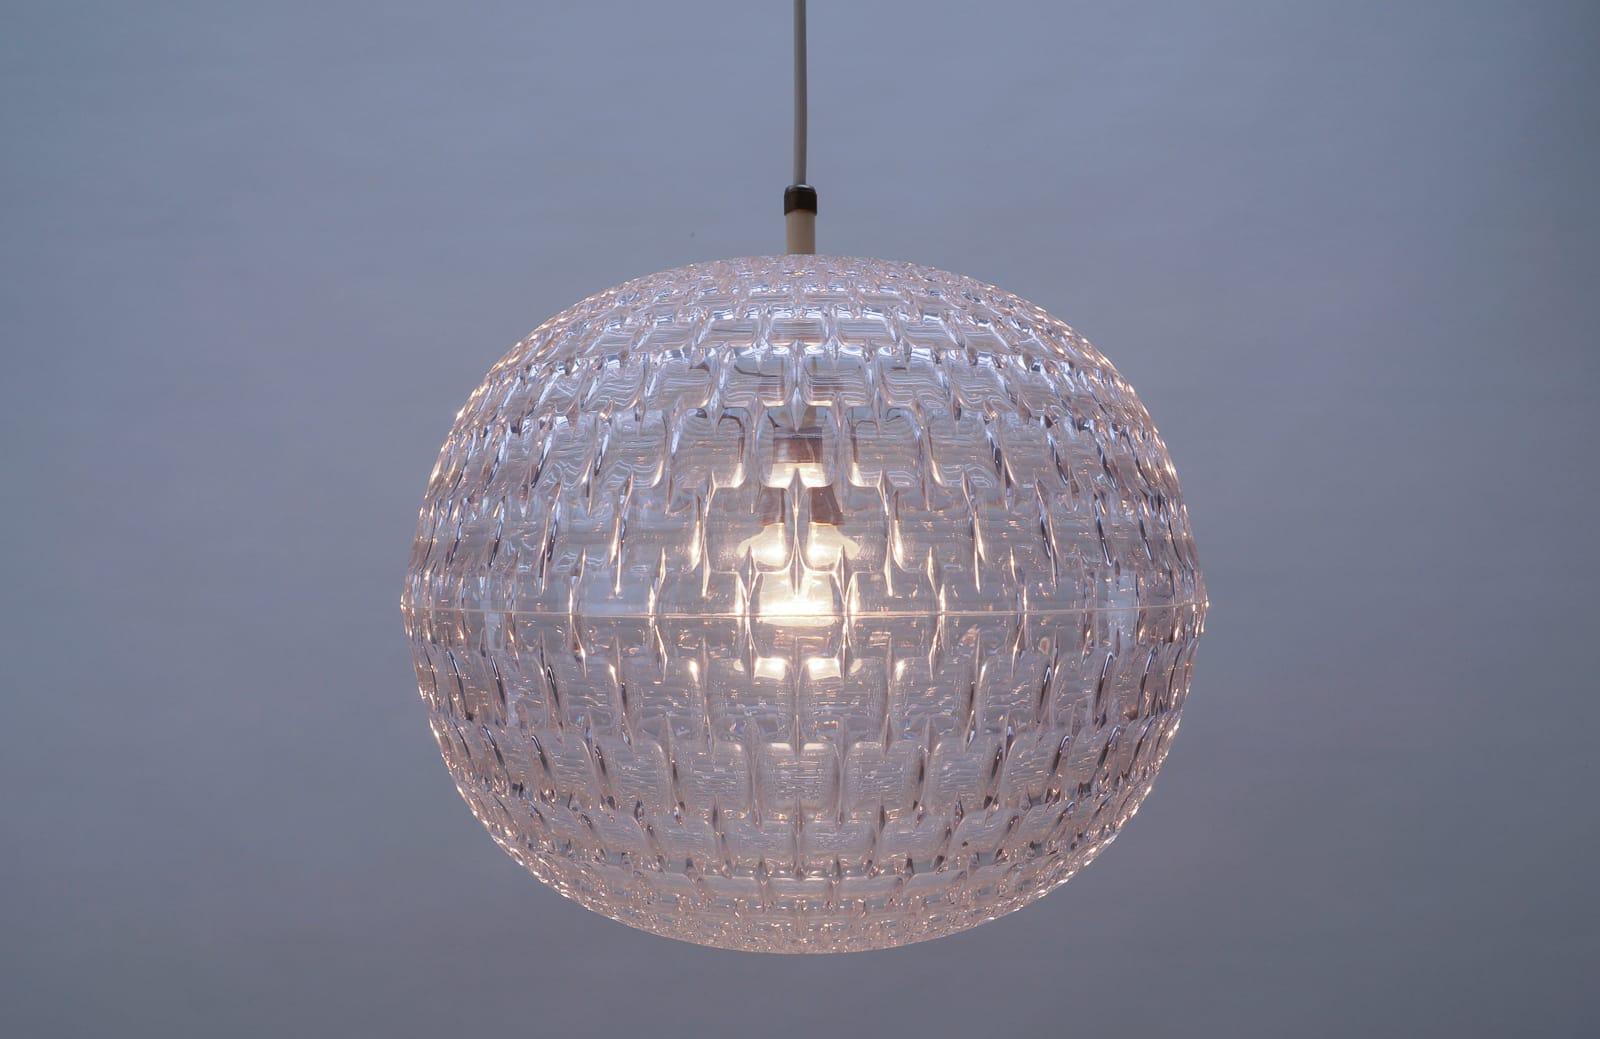 Clear Acrylic Pendant Lamp by Aloys F. Gangkofner for Erco Leuchten, 1960s For Sale 1